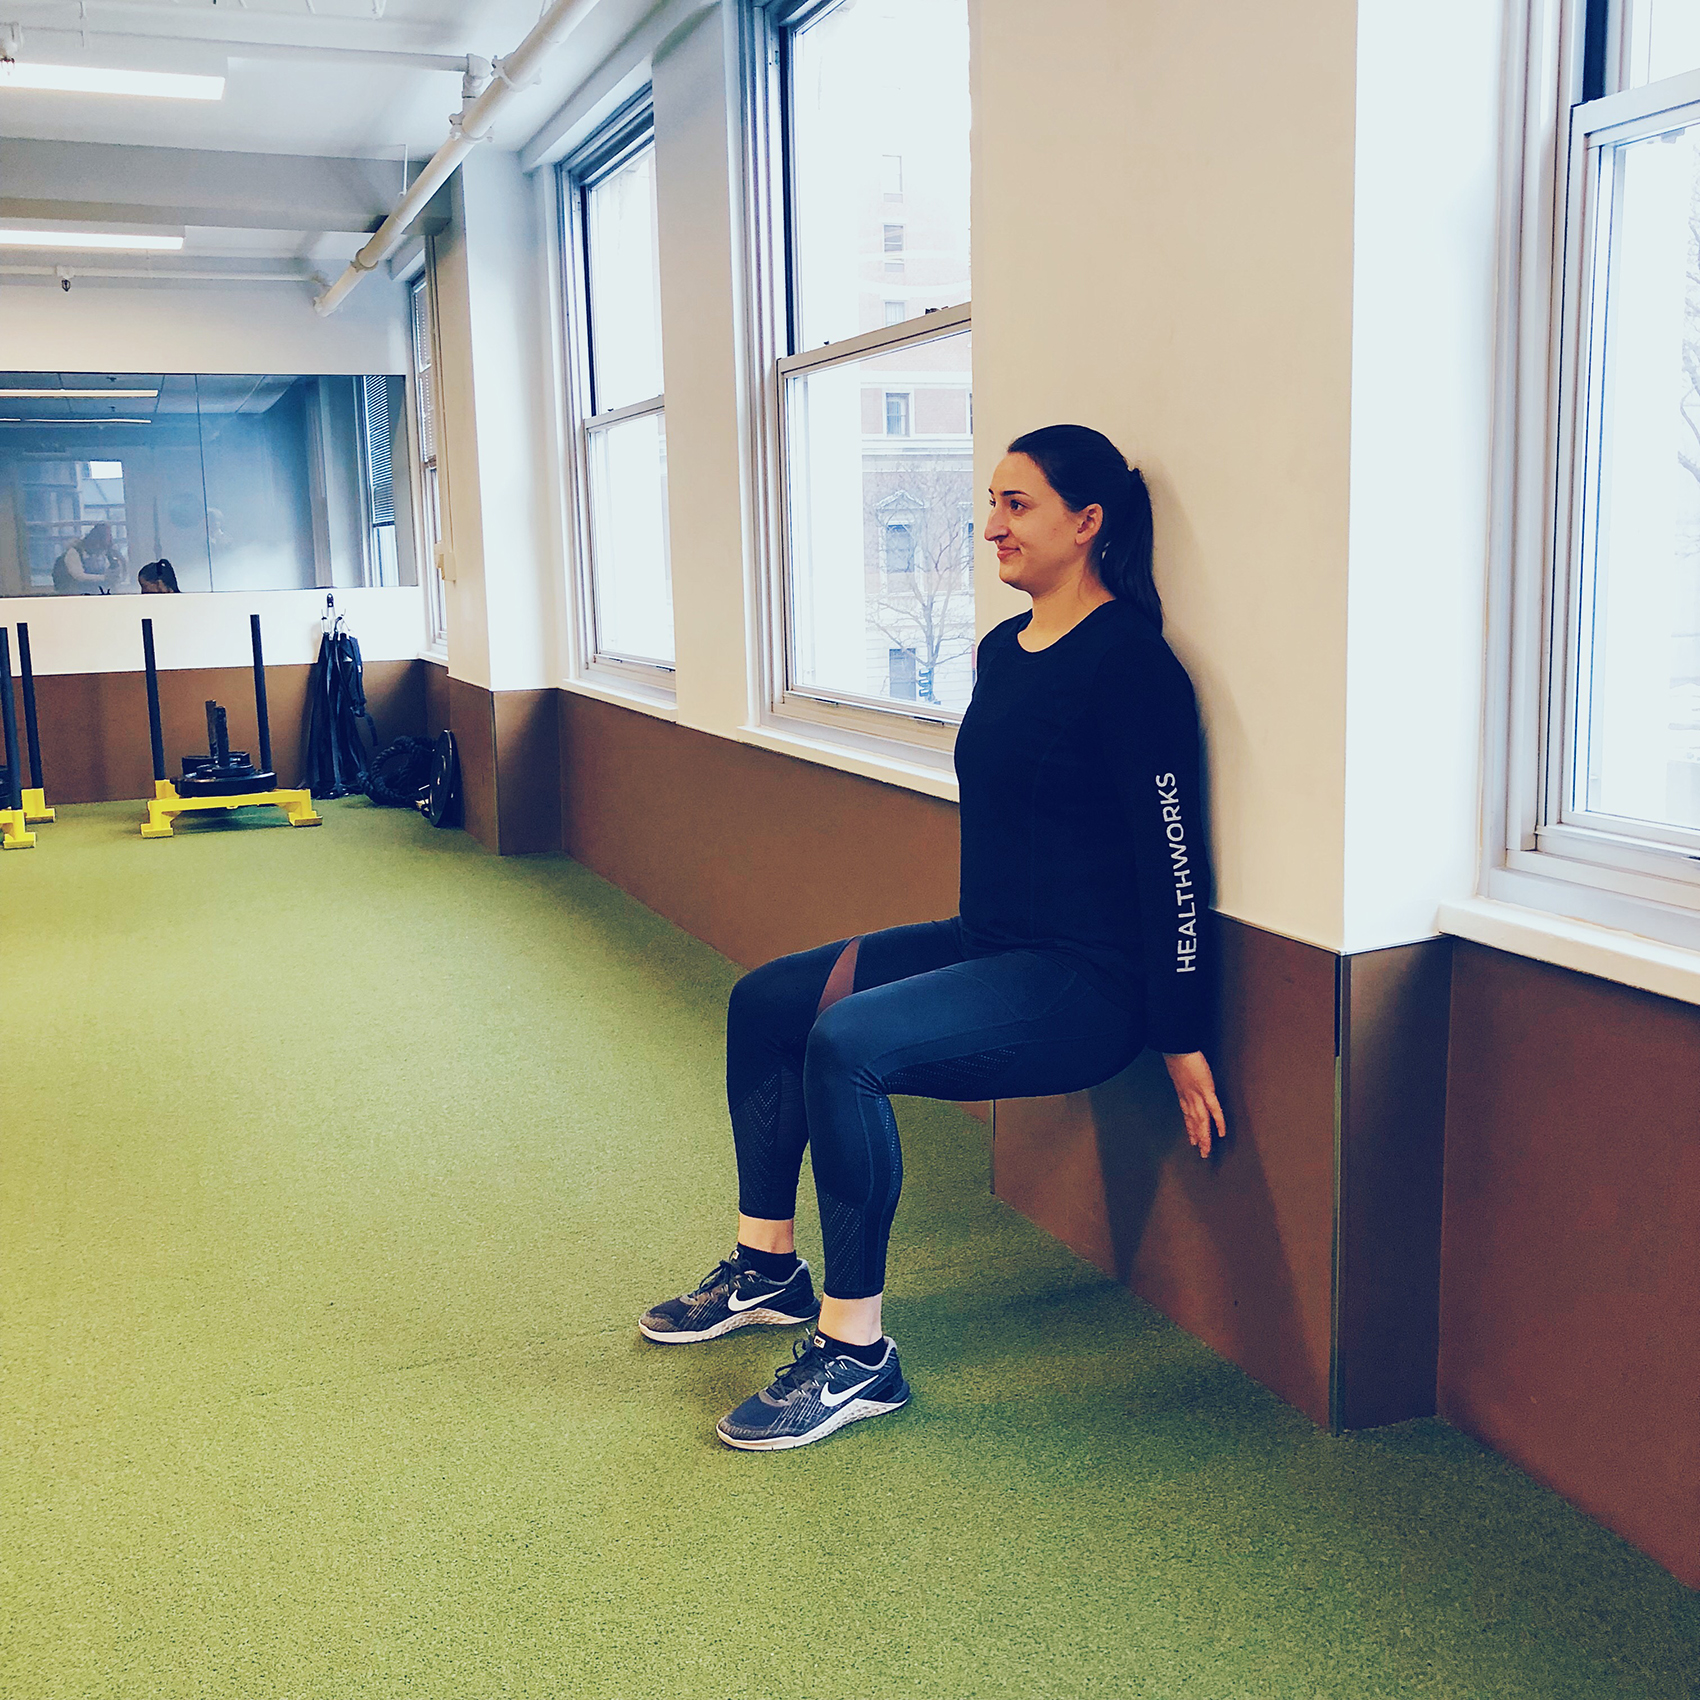 January’s Fitness Challenge: Hold It! How Long Can You Stay in a Wall Sit?